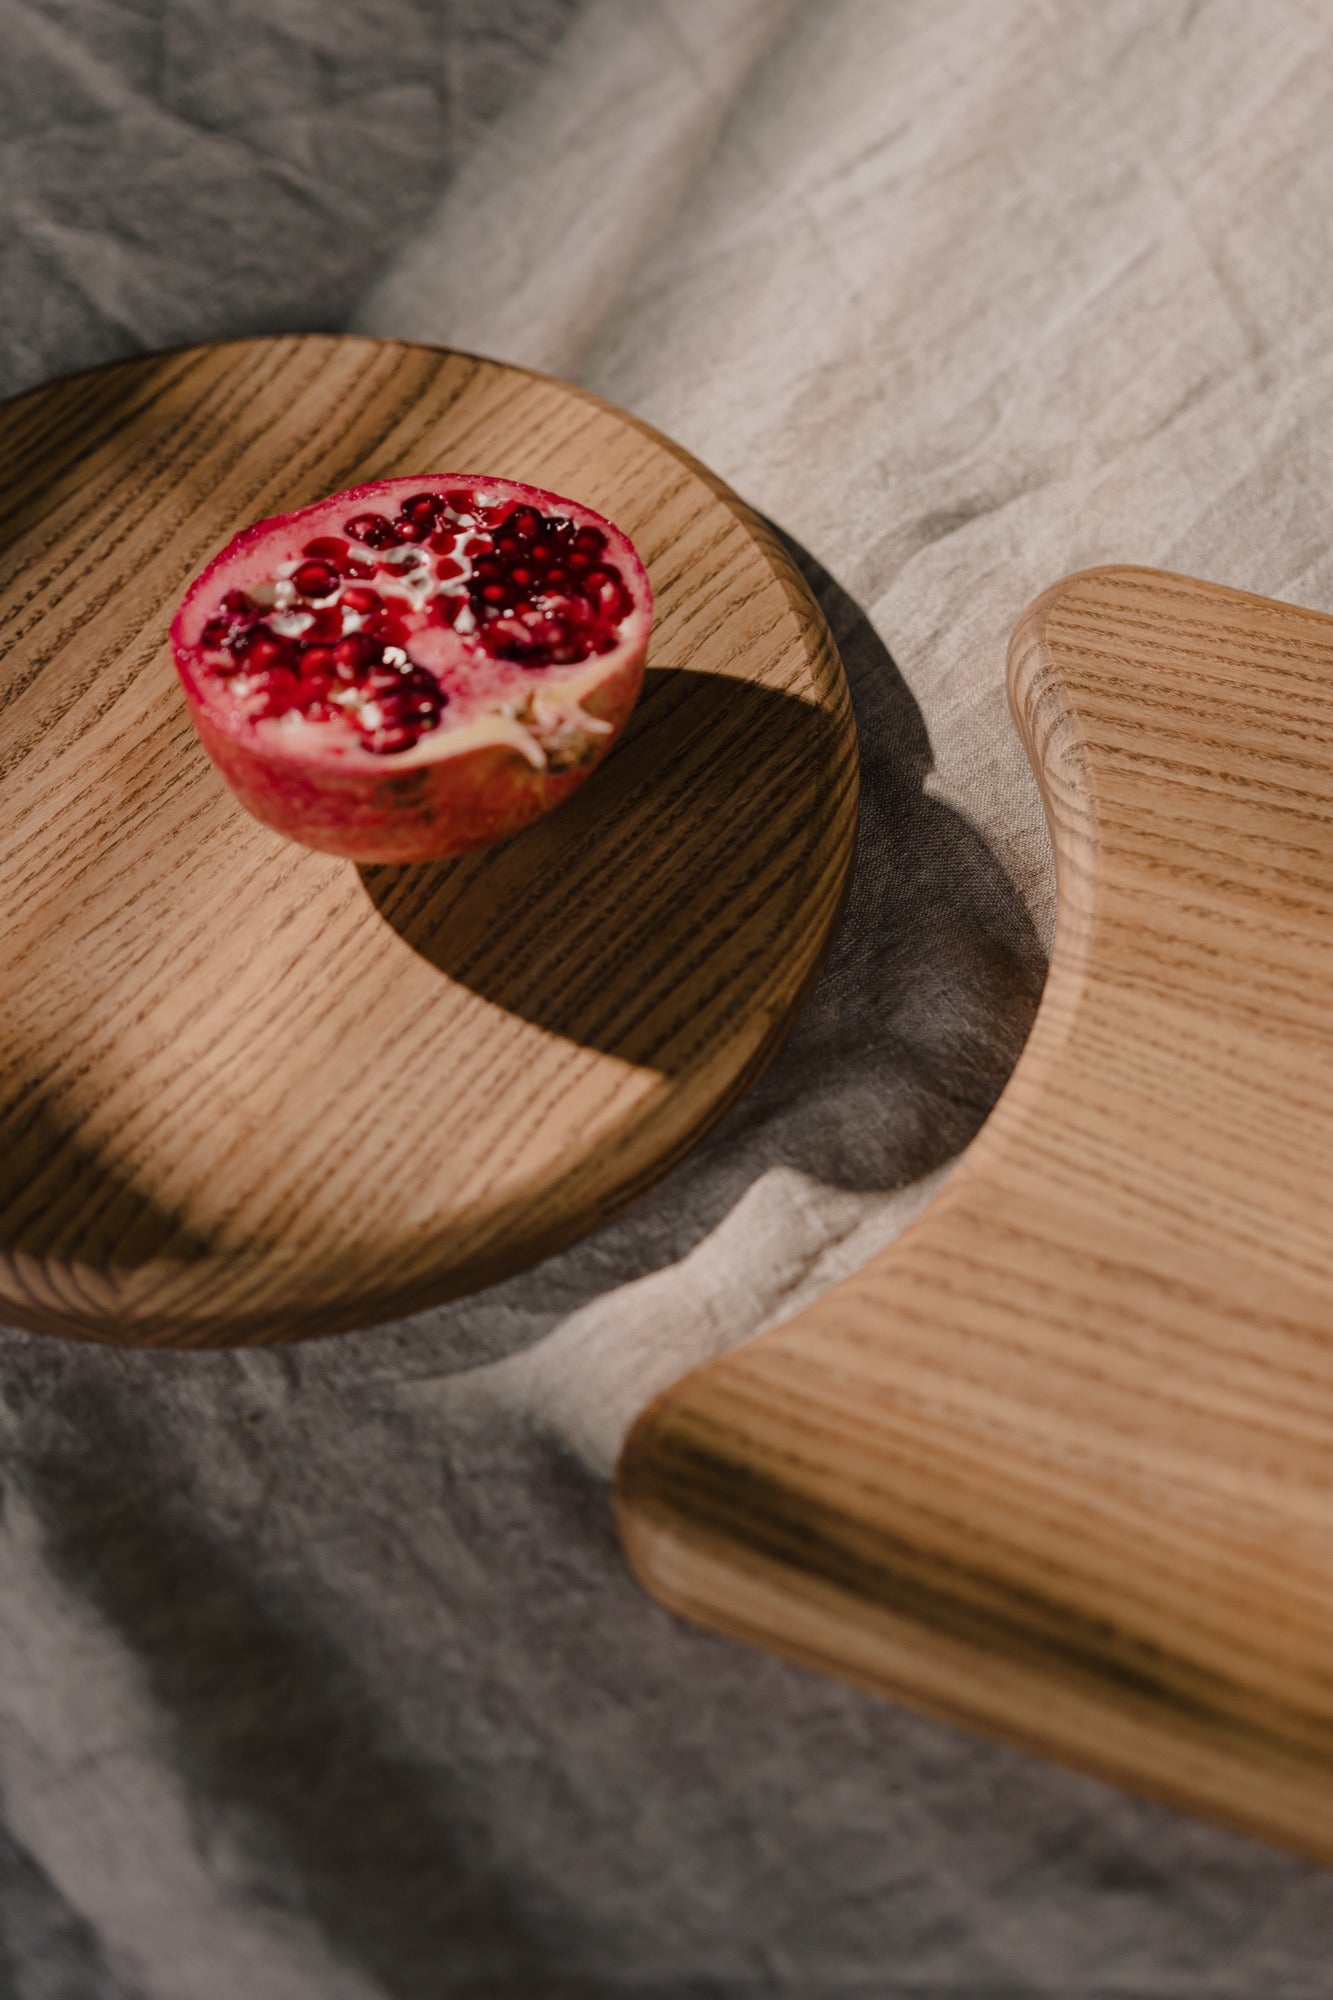 Tappa Serving Boards